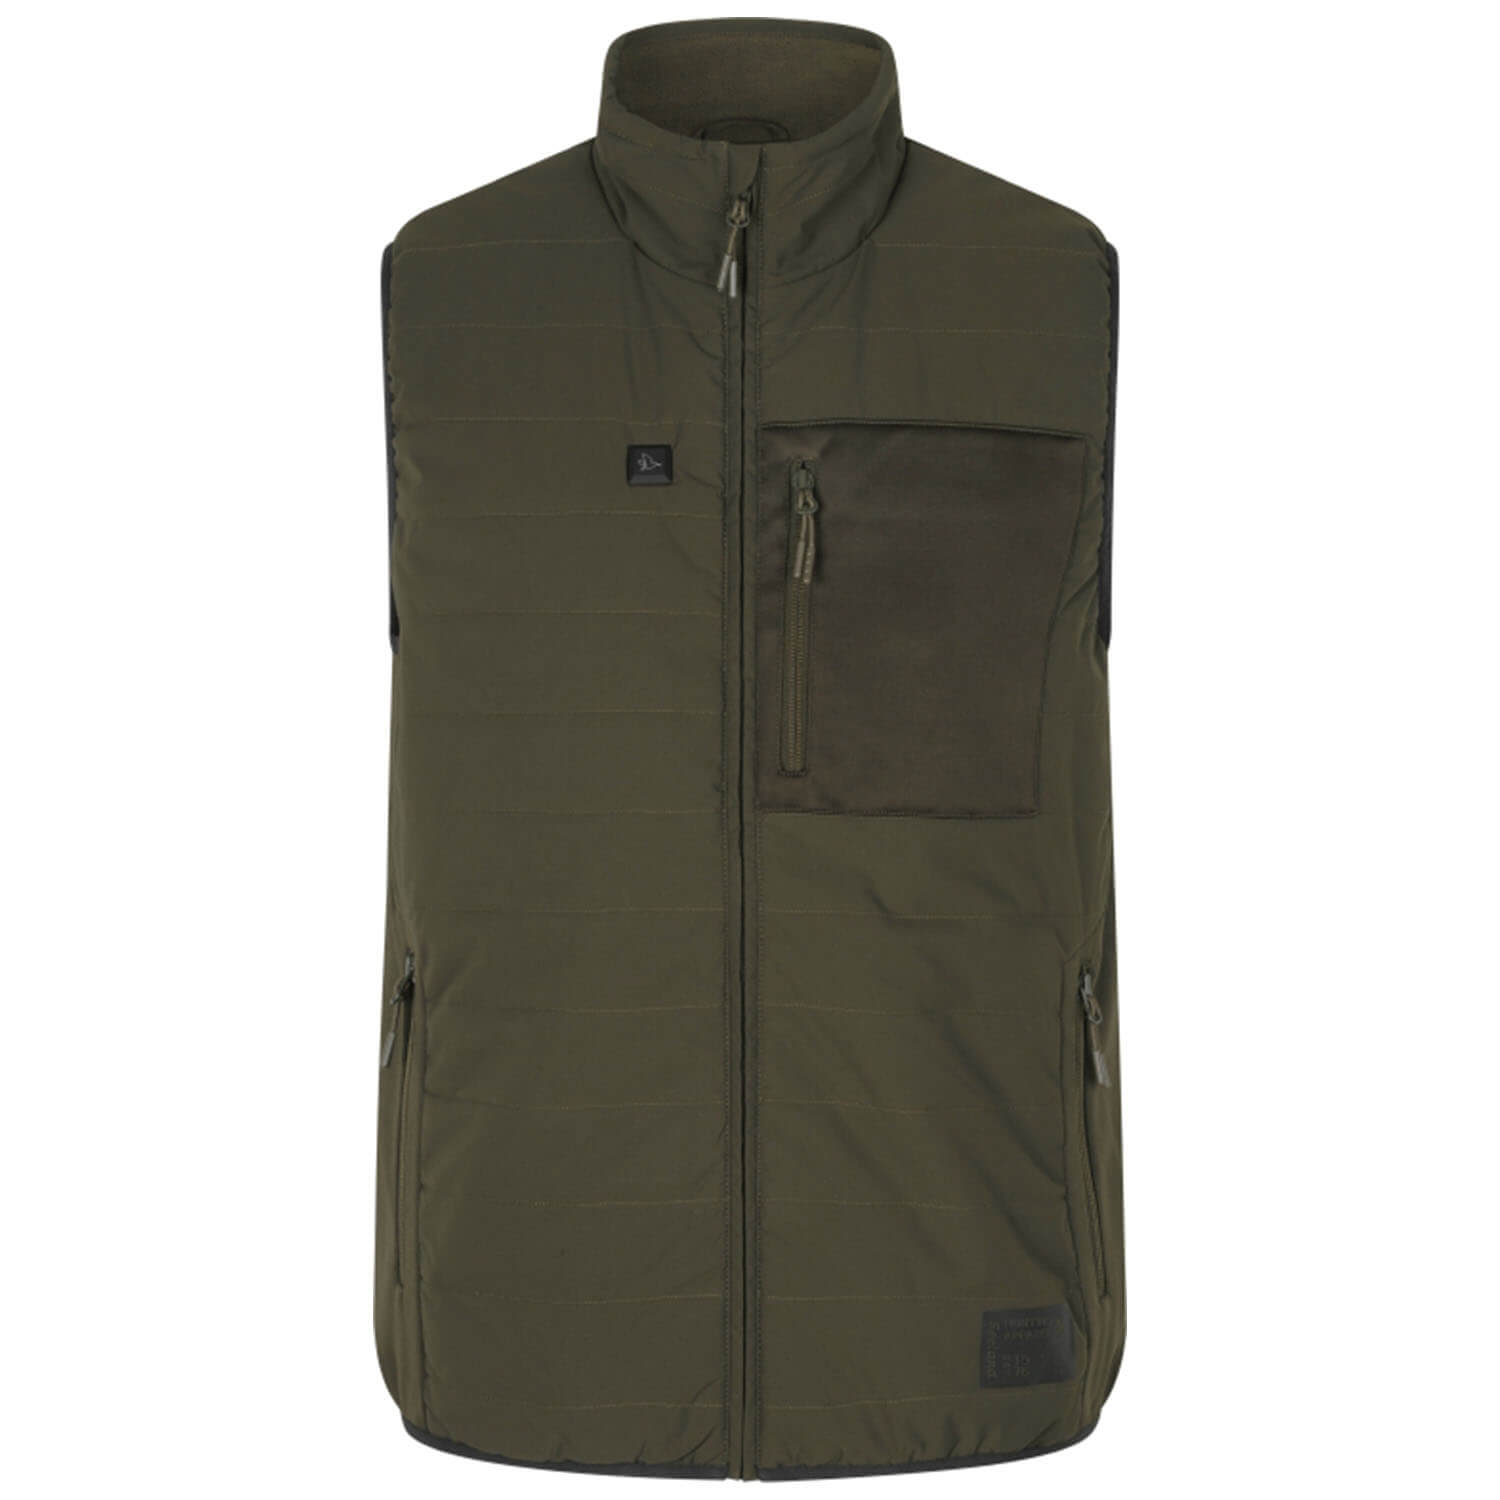 Seeland heat vest celsius (Pine Green) - Winter Hunting Clothing